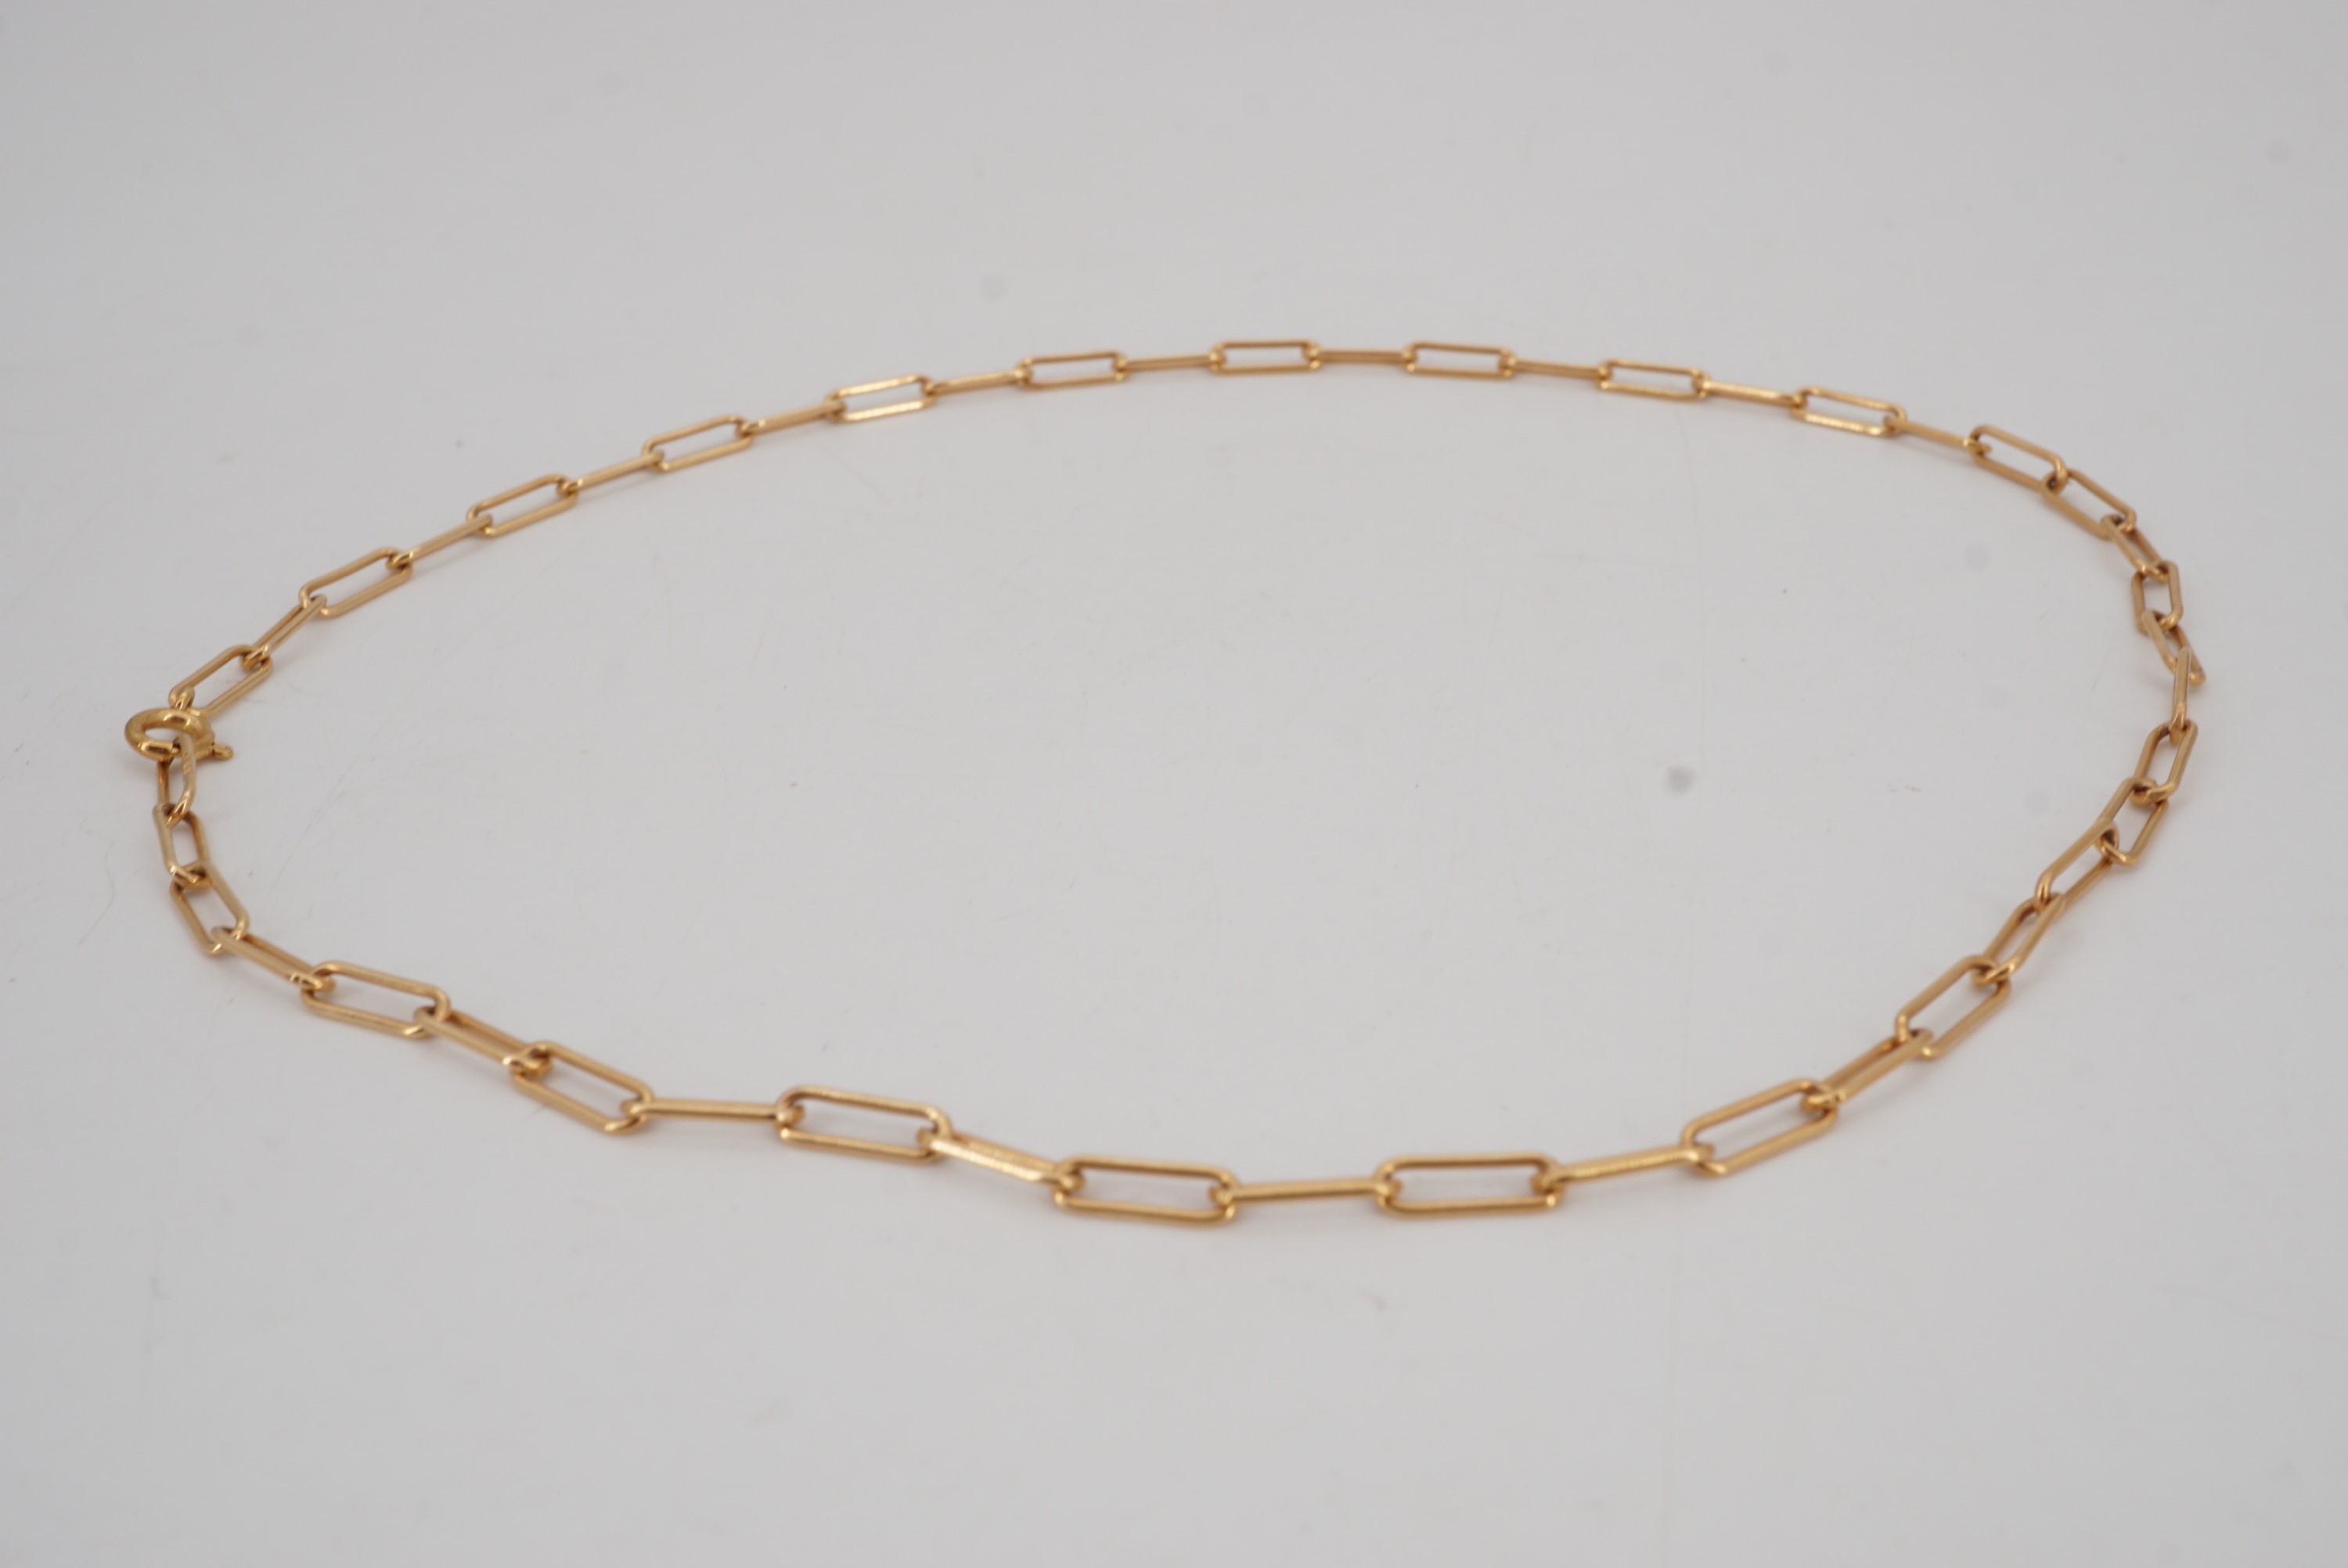 A 9 ct gold elongated belcher link neck chain, 38 cm, 5.8 g - Image 2 of 3